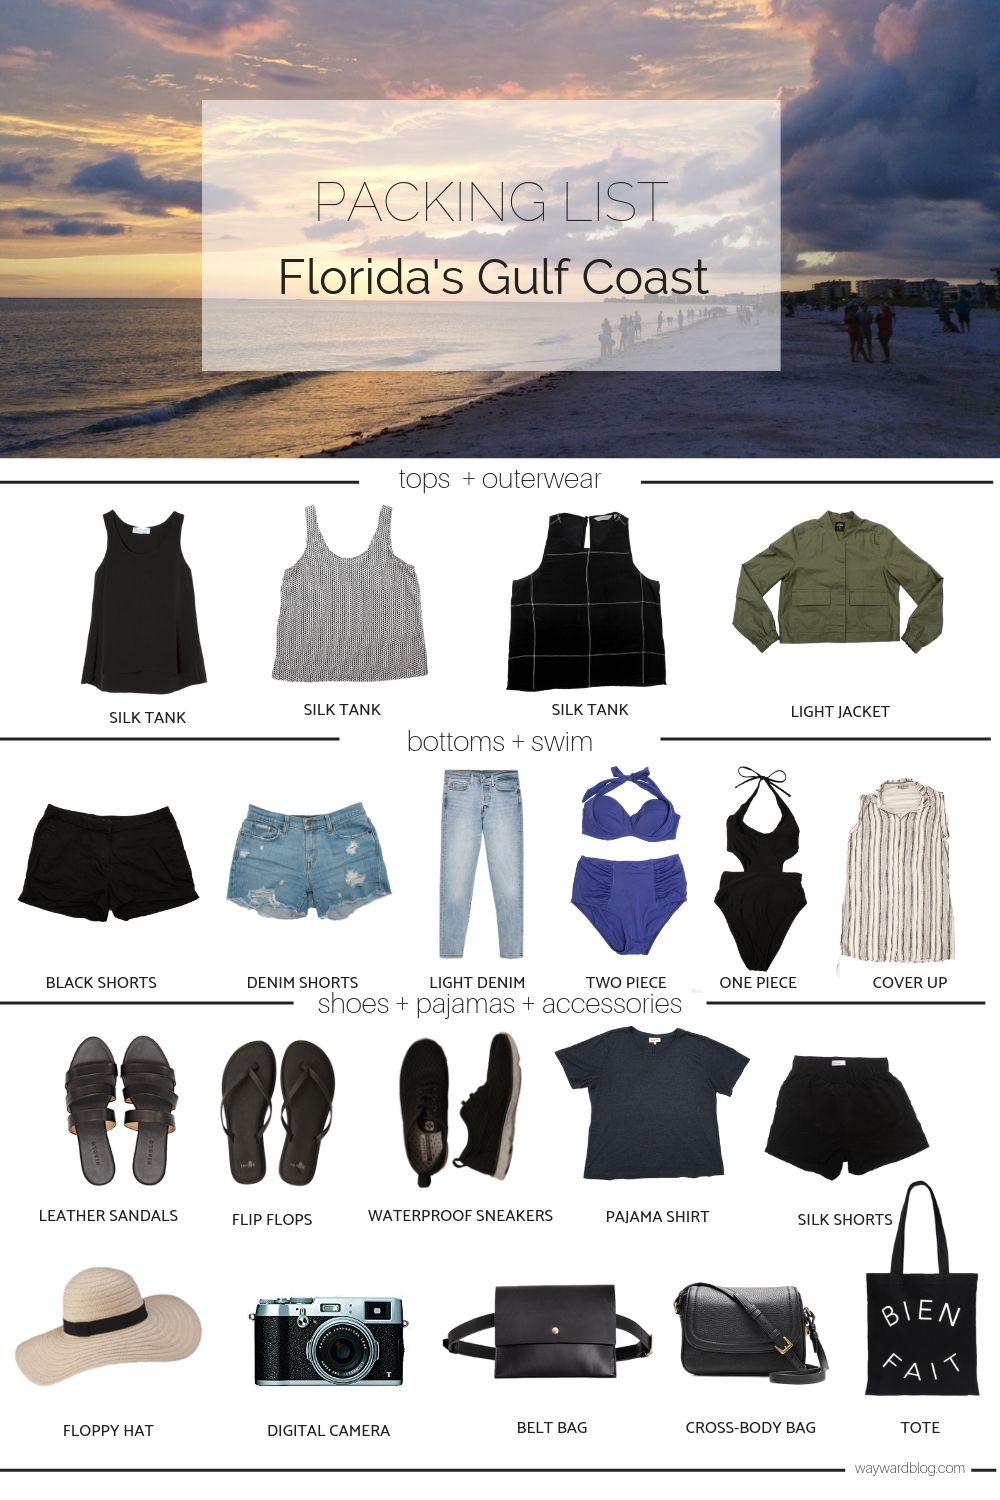 Pinterest Pin with all items of clothing in a grid